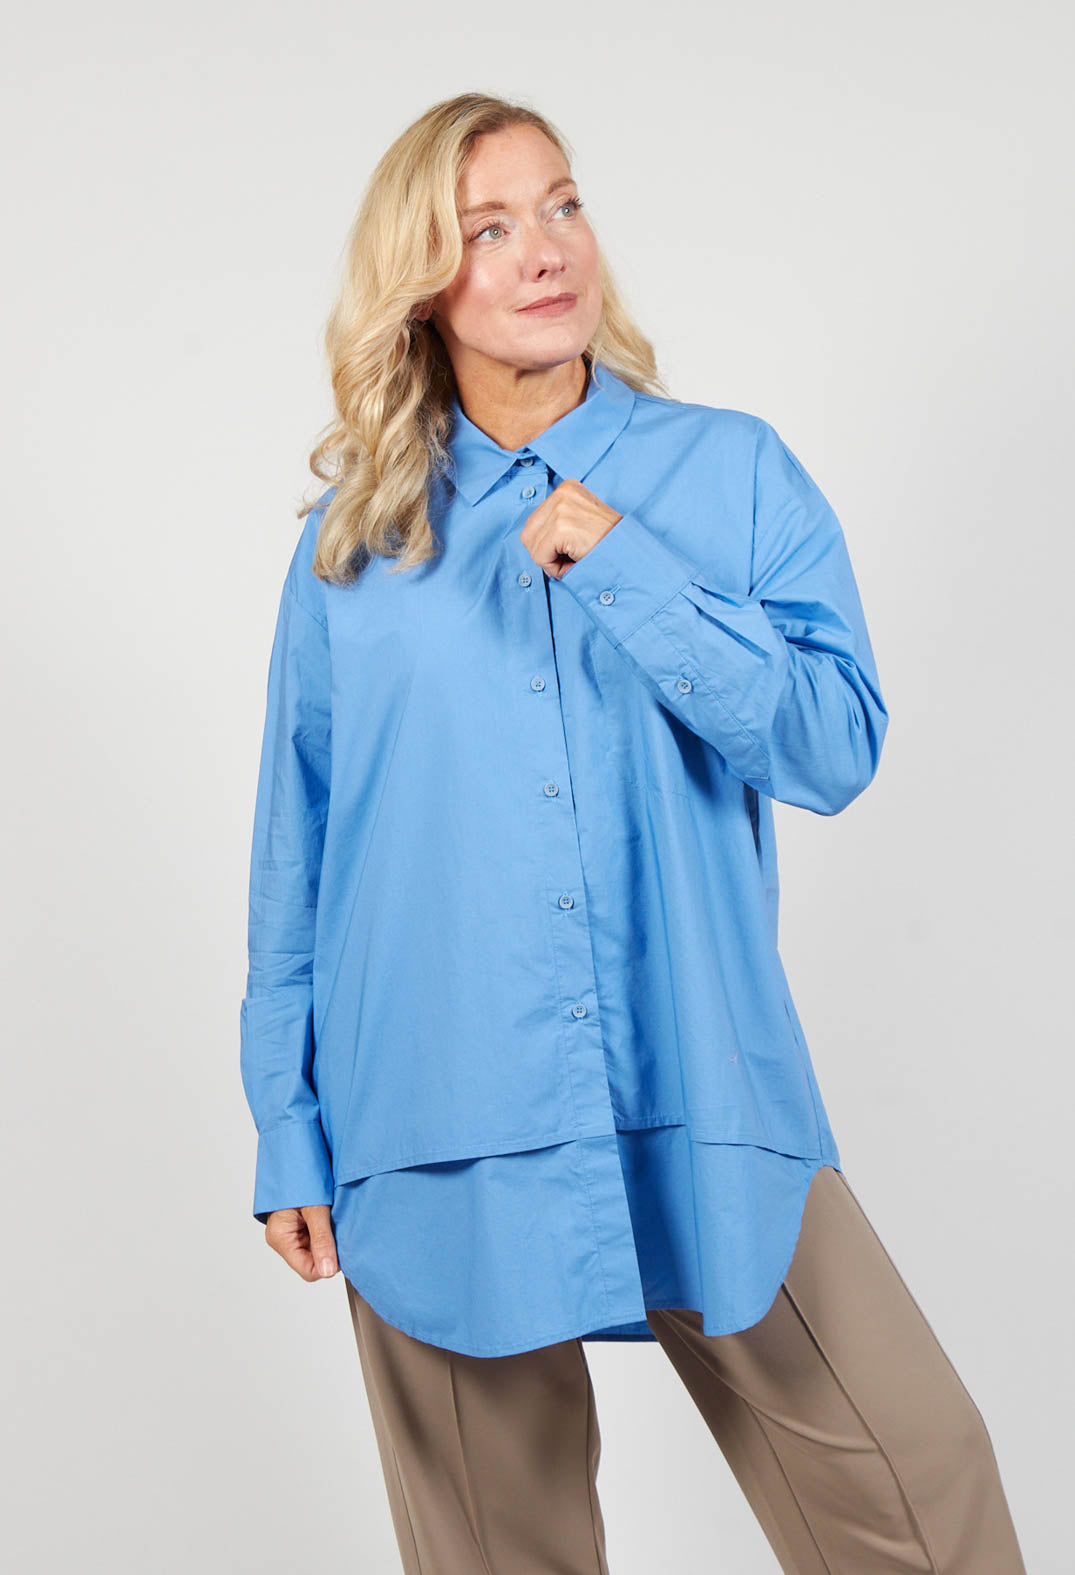 lady wearing a sky blue blouse with long sleeves